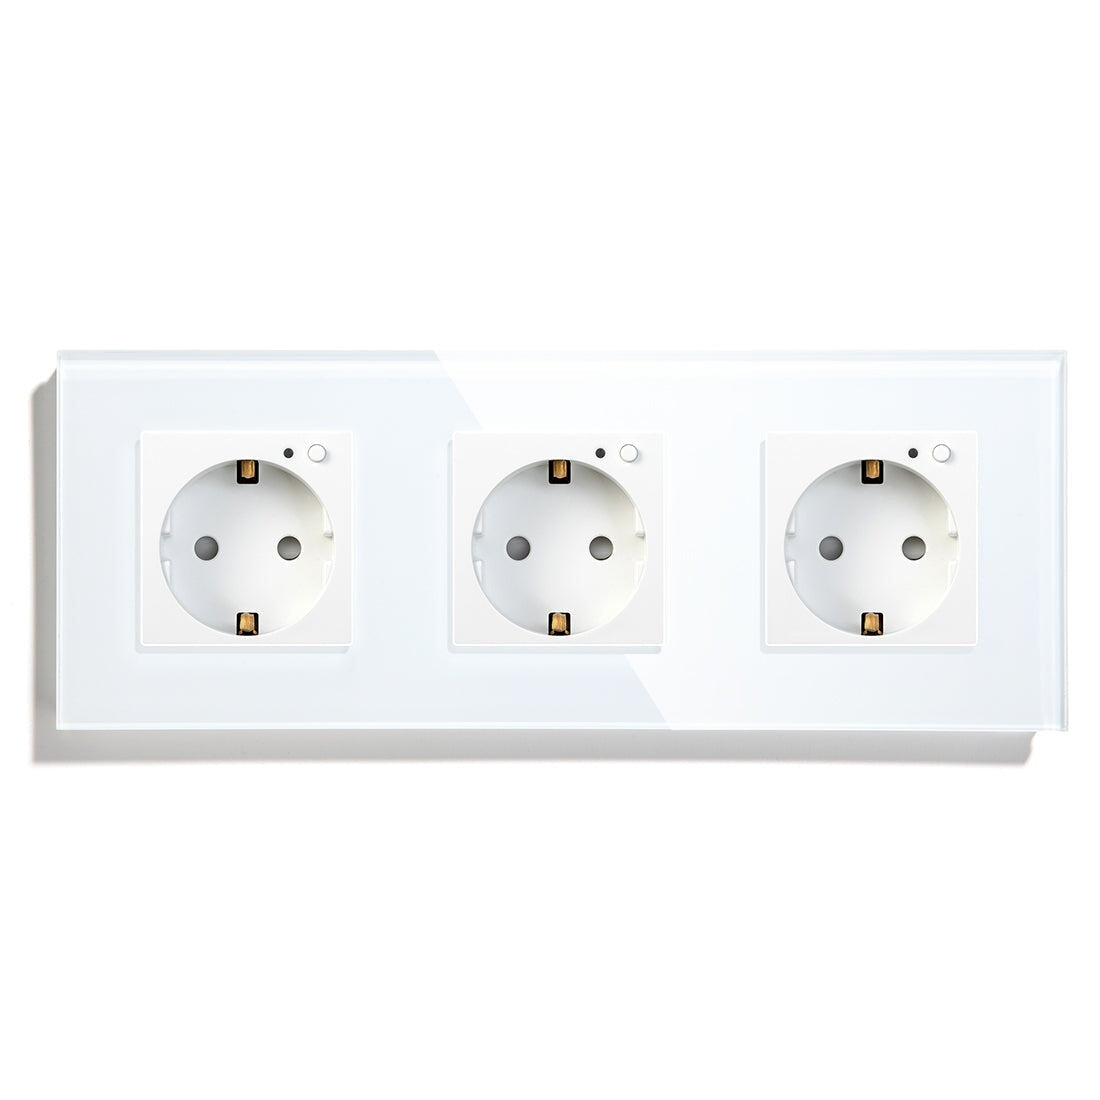 BSEED ZigBee EU Wall Sockets Power Outlets Kids Protection Wall Plates & Covers Bseedswitch white Triple 